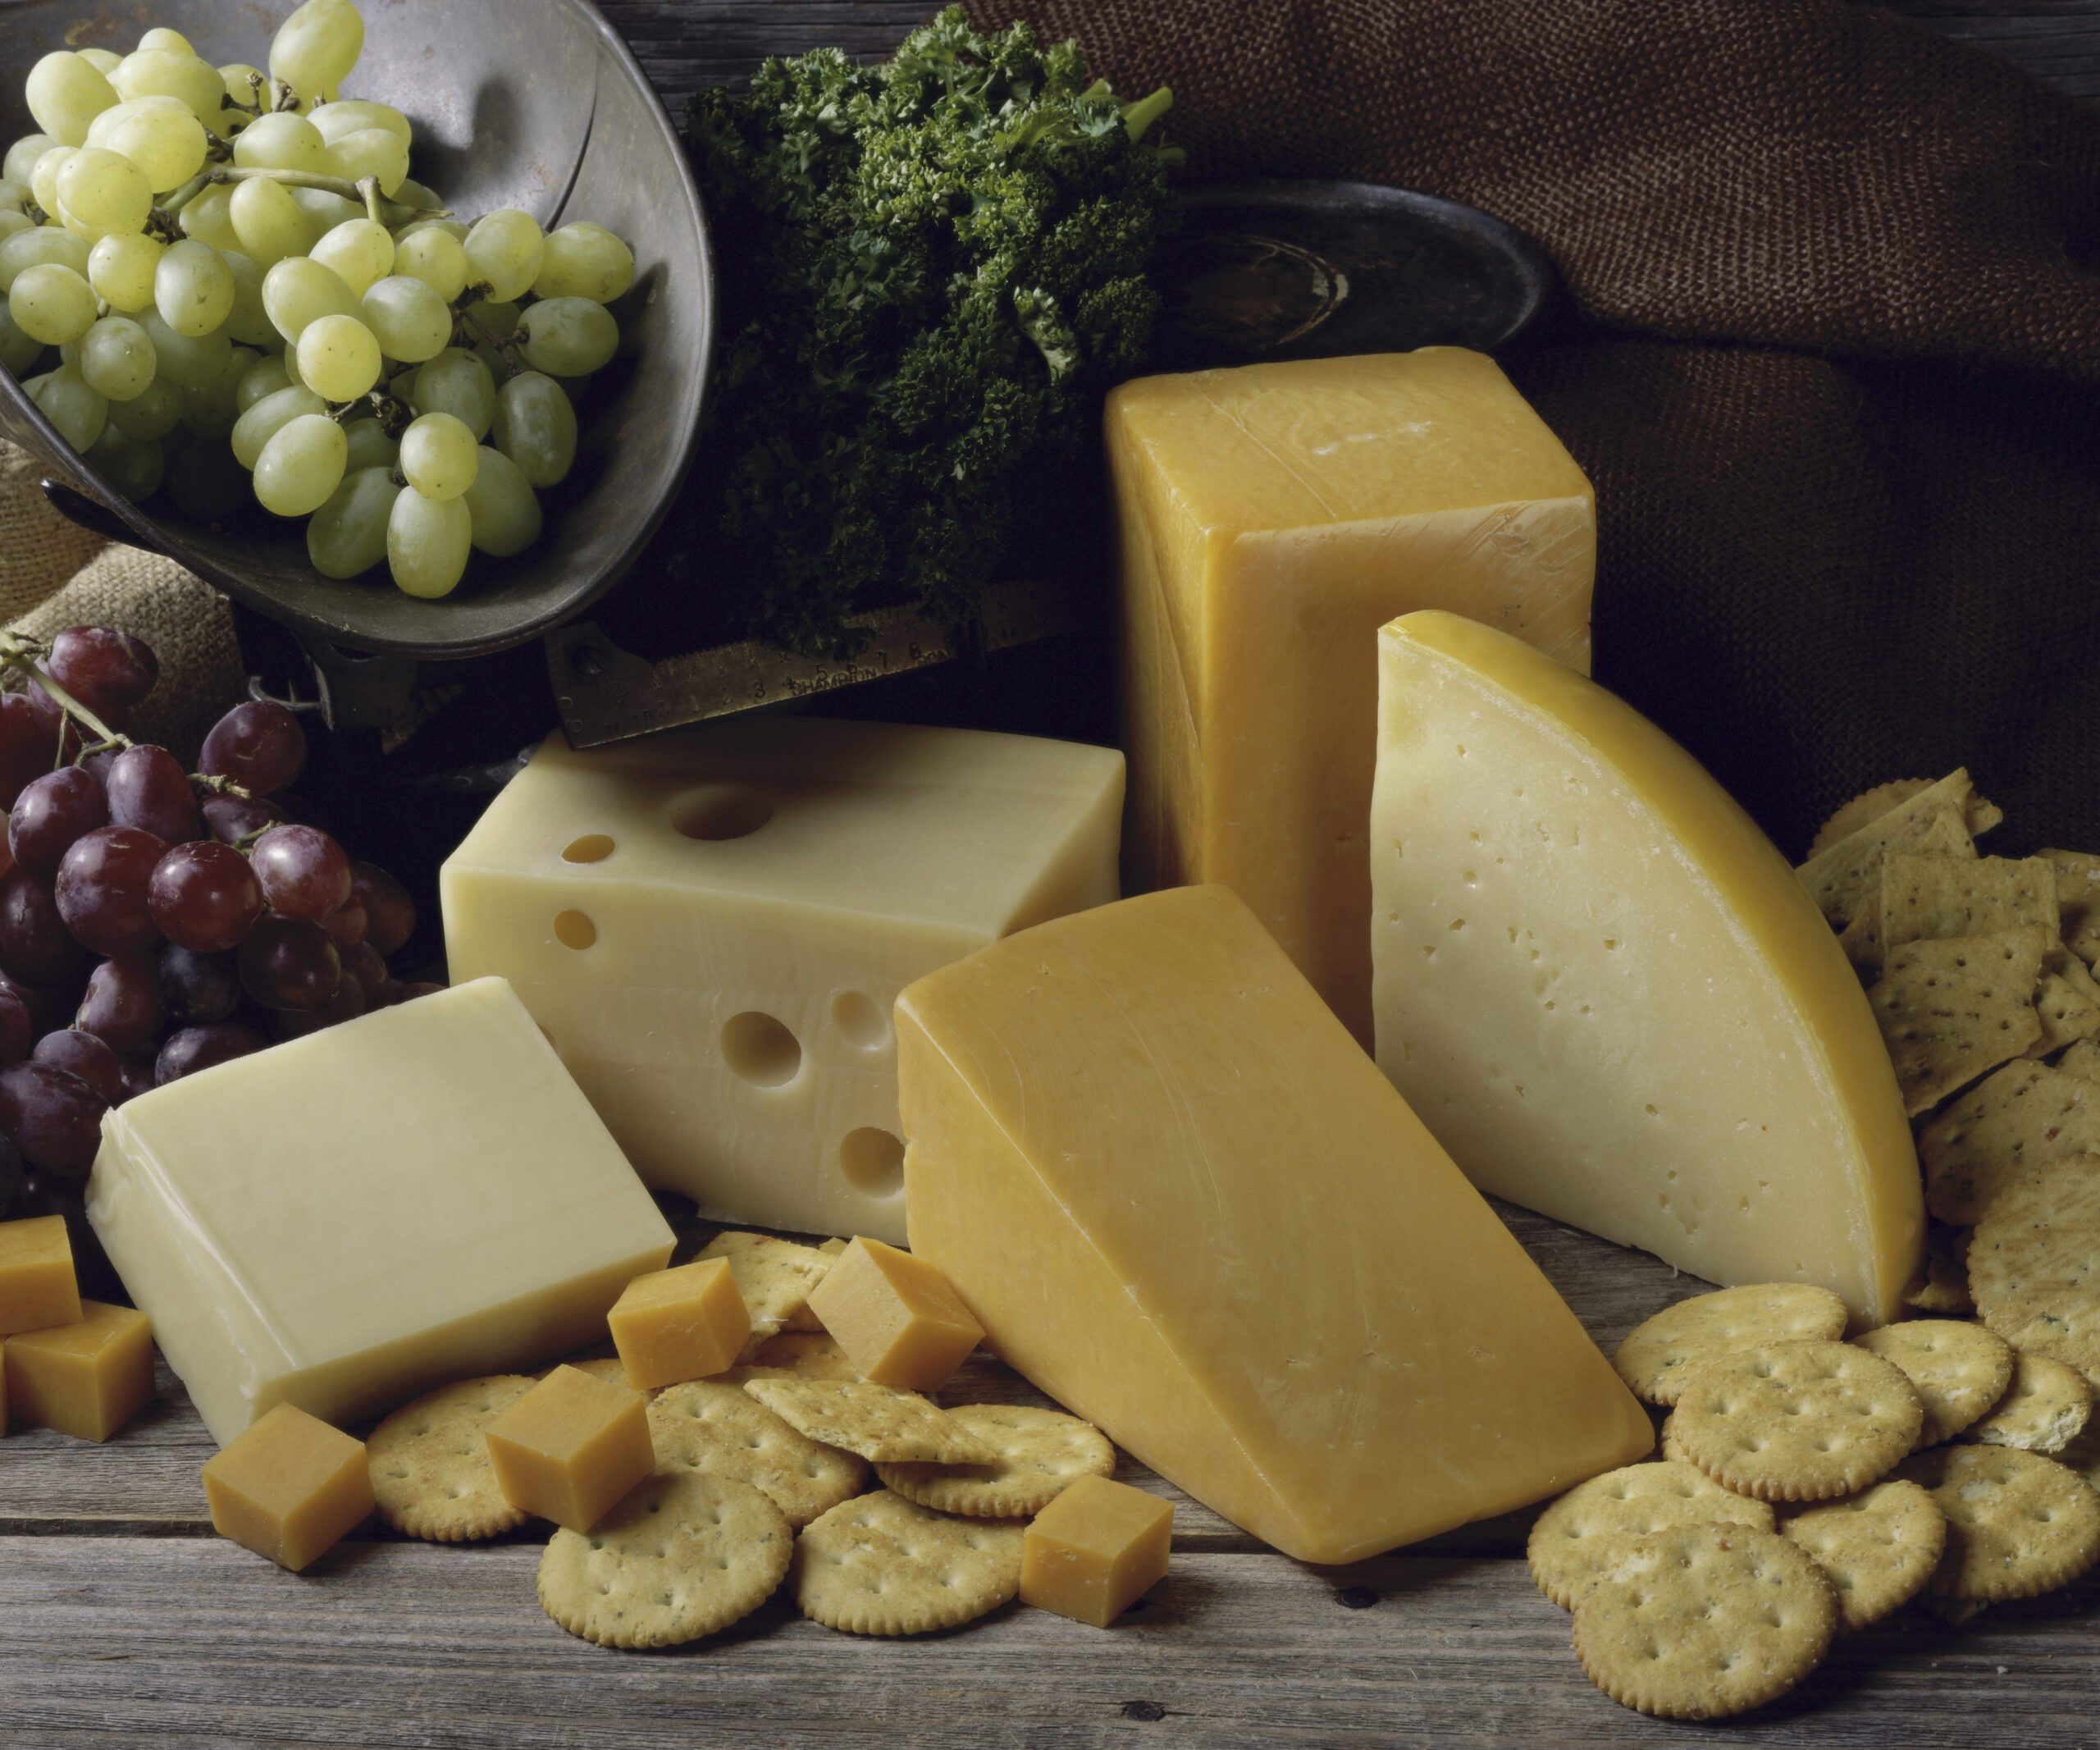 Doctor suggests cheese is as addictive as drugs